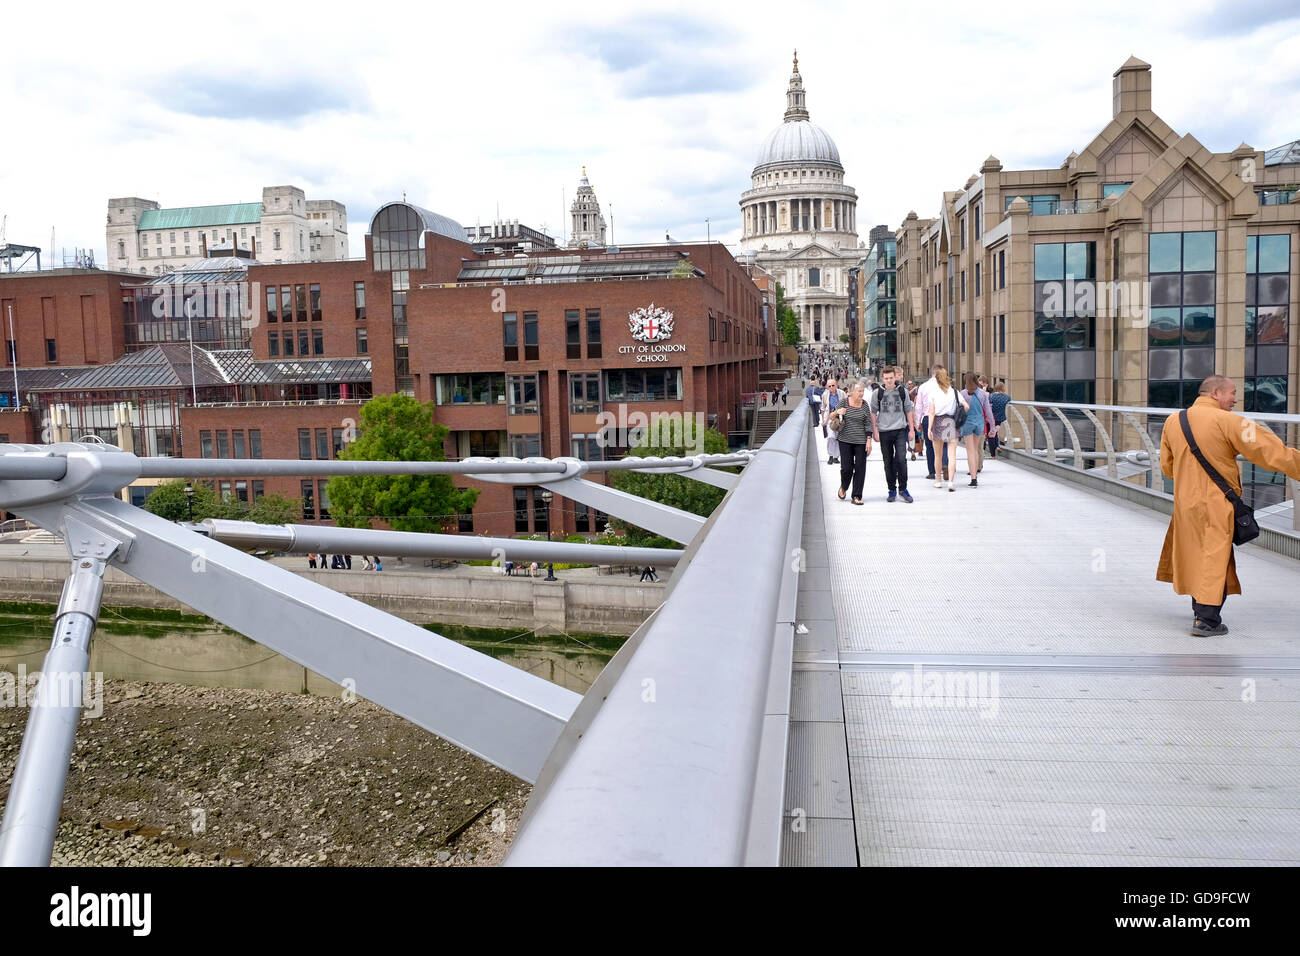 London, United Kingdom. London Skyline from the Millennium Bridge which crosses the Thames river with St Paul's Cathedral a London landmark Stock Photo